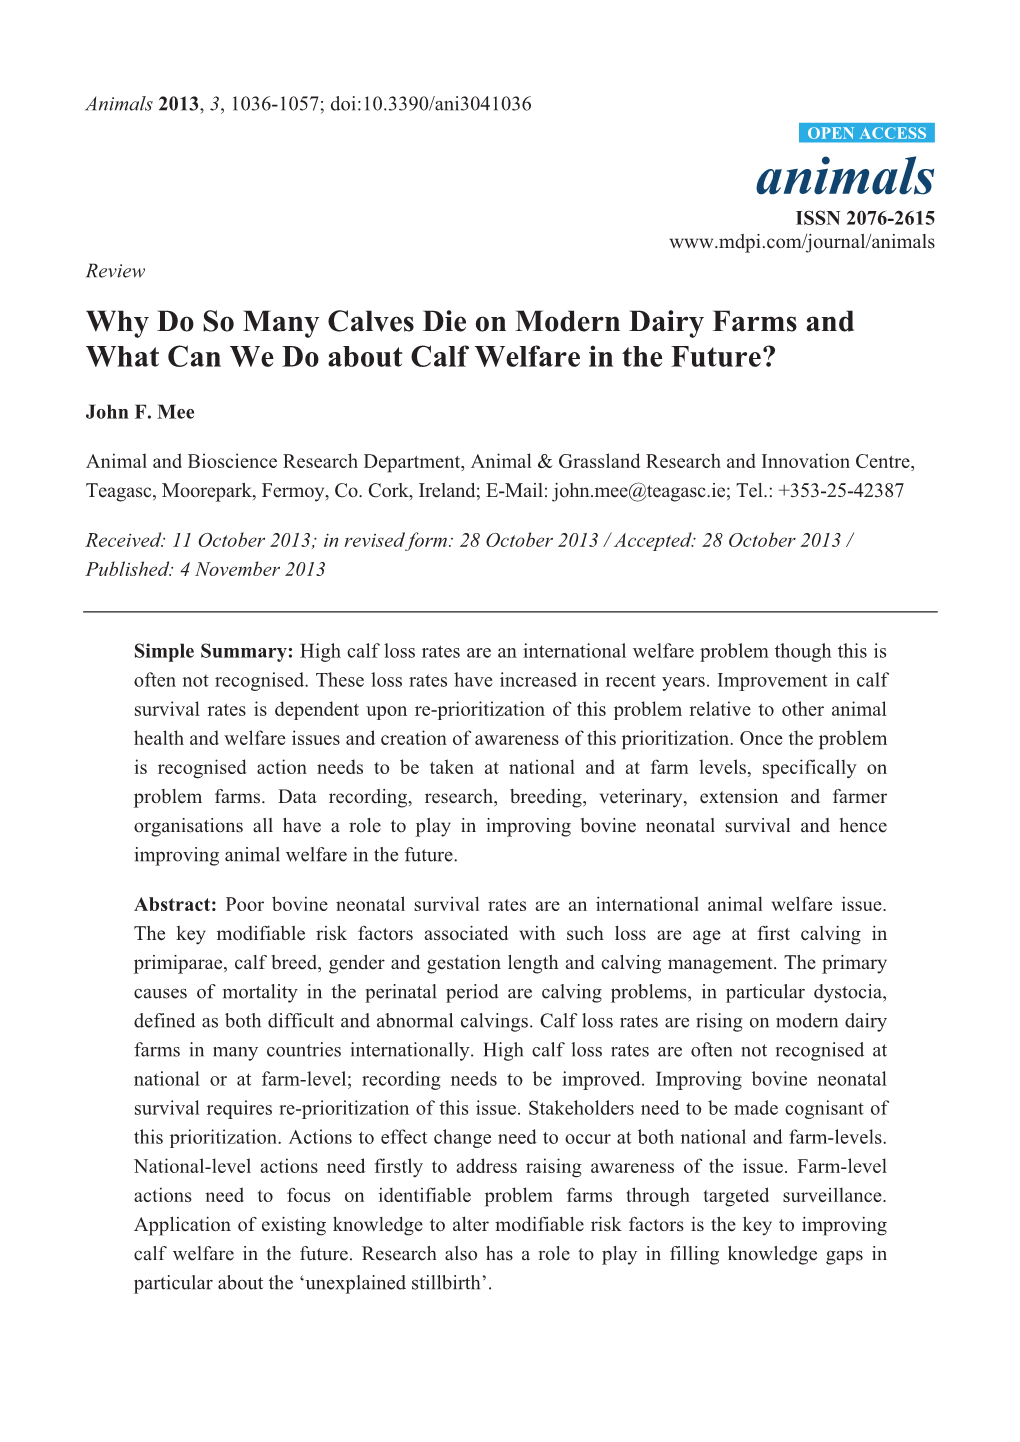 Why Do So Many Calves Die on Modern Dairy Farms and What Can We Do About Calf Welfare in the Future?